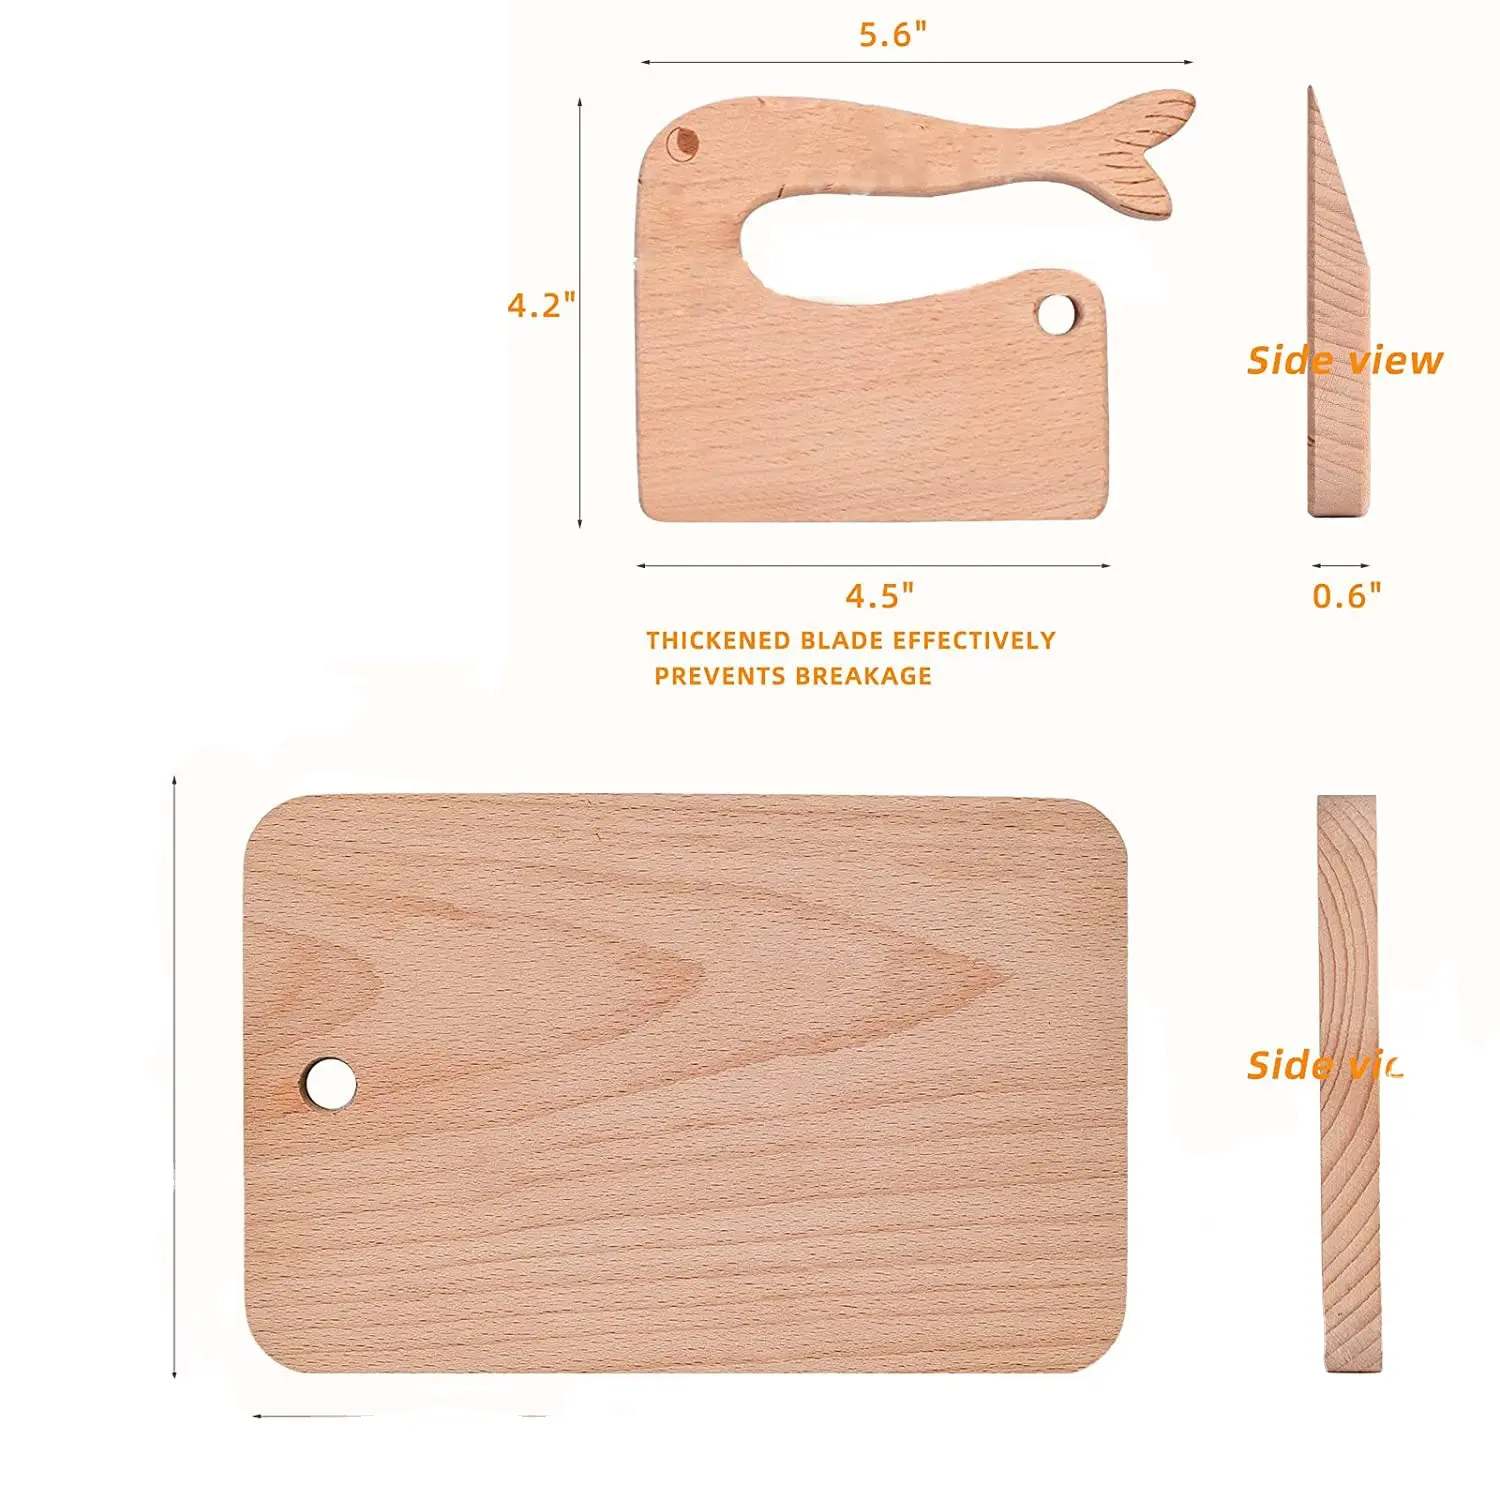 Wooden Montessori Toy Wooden Kids Knife And Board Wooden Toddler Knife For Real Cooking